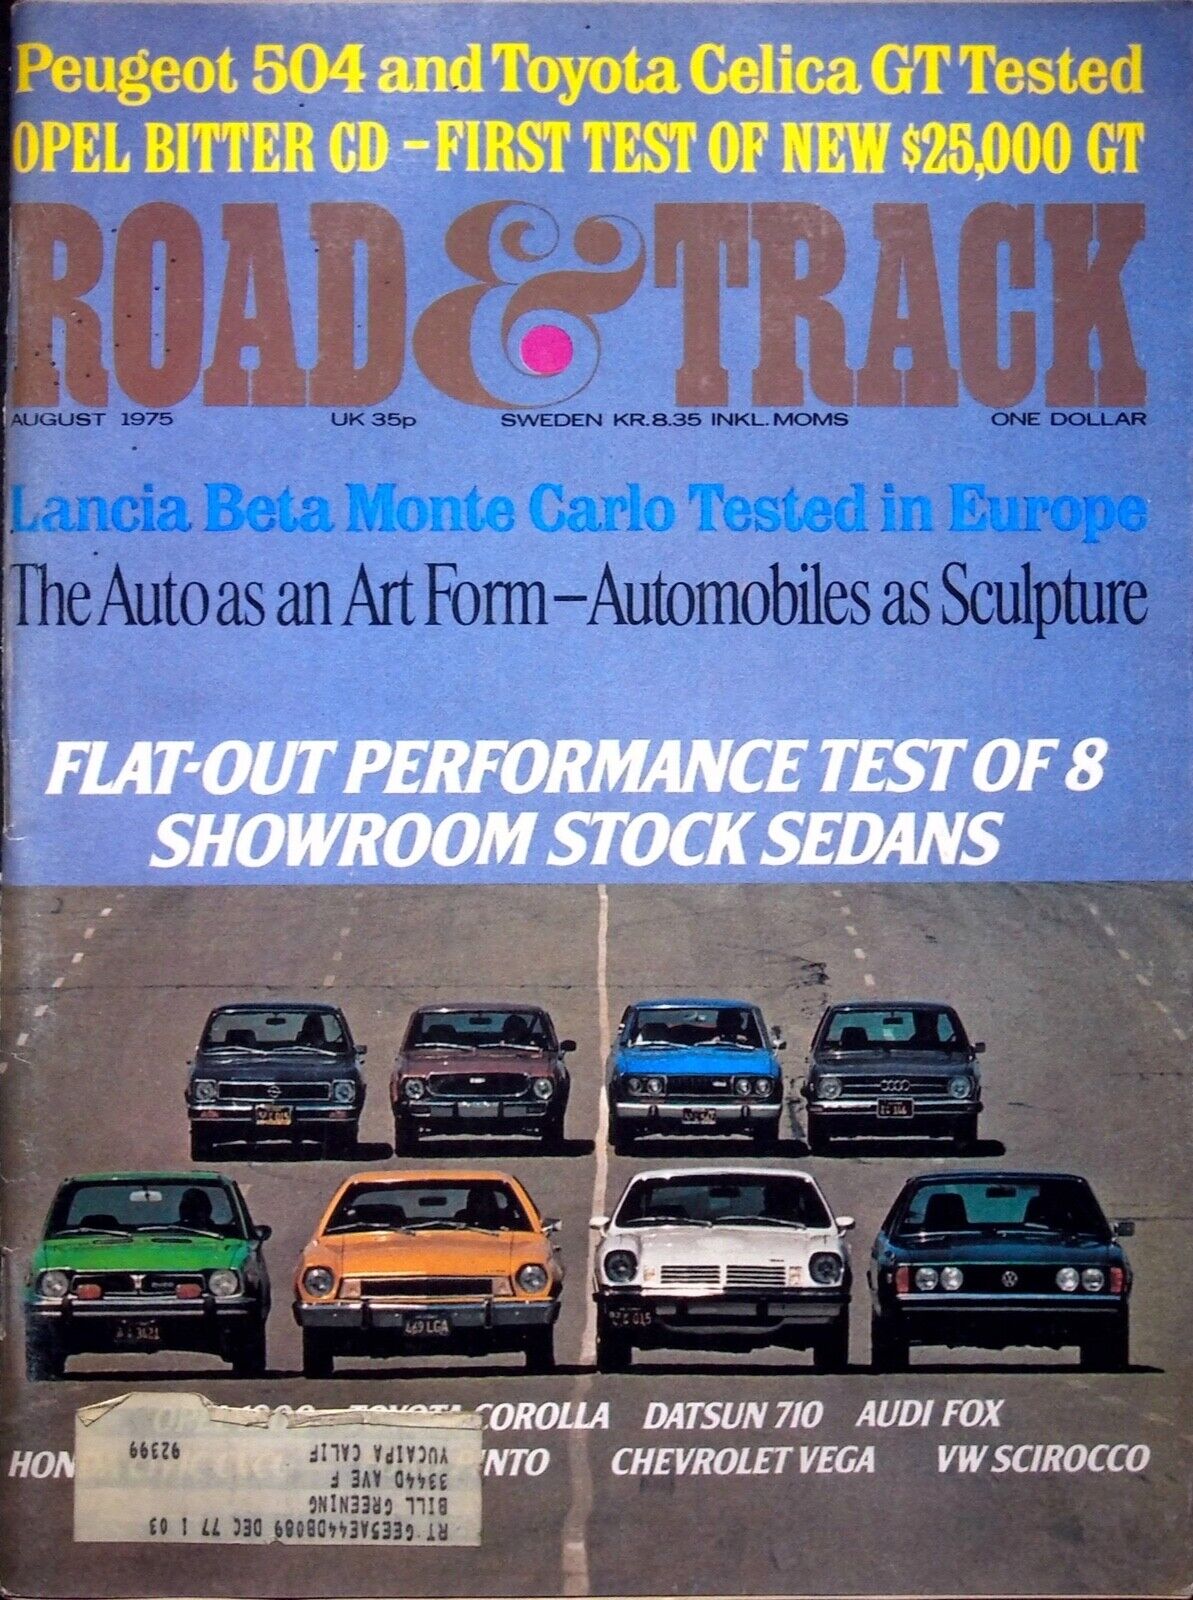 FLAT-OUT PERFORMANCE TEST OF 8 SHOWROOM - ROAD & TRACK MAGAZINE, AUGUST 1975